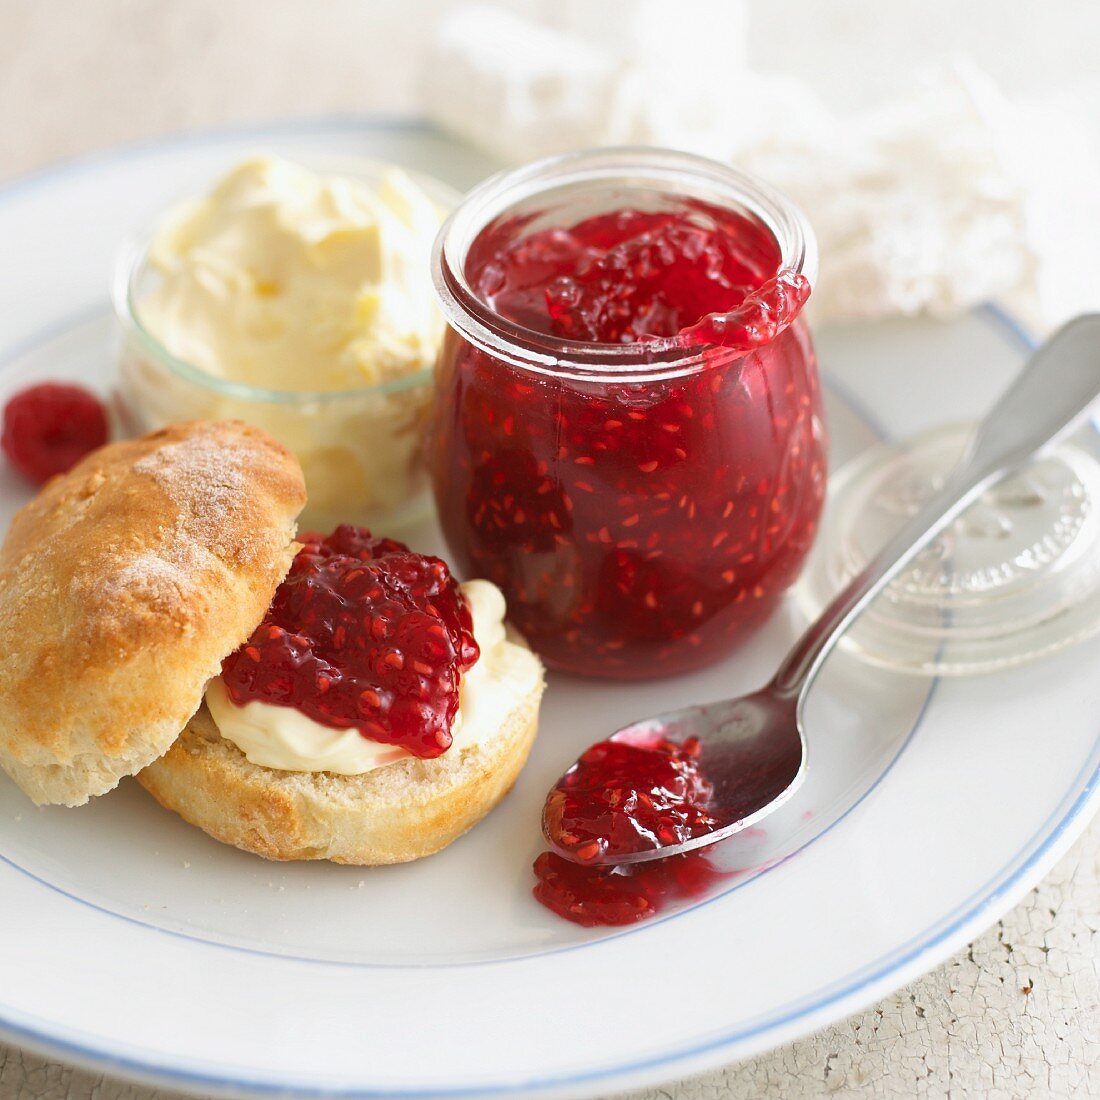 Scones with clotted cream and raspberry marmalade (England)